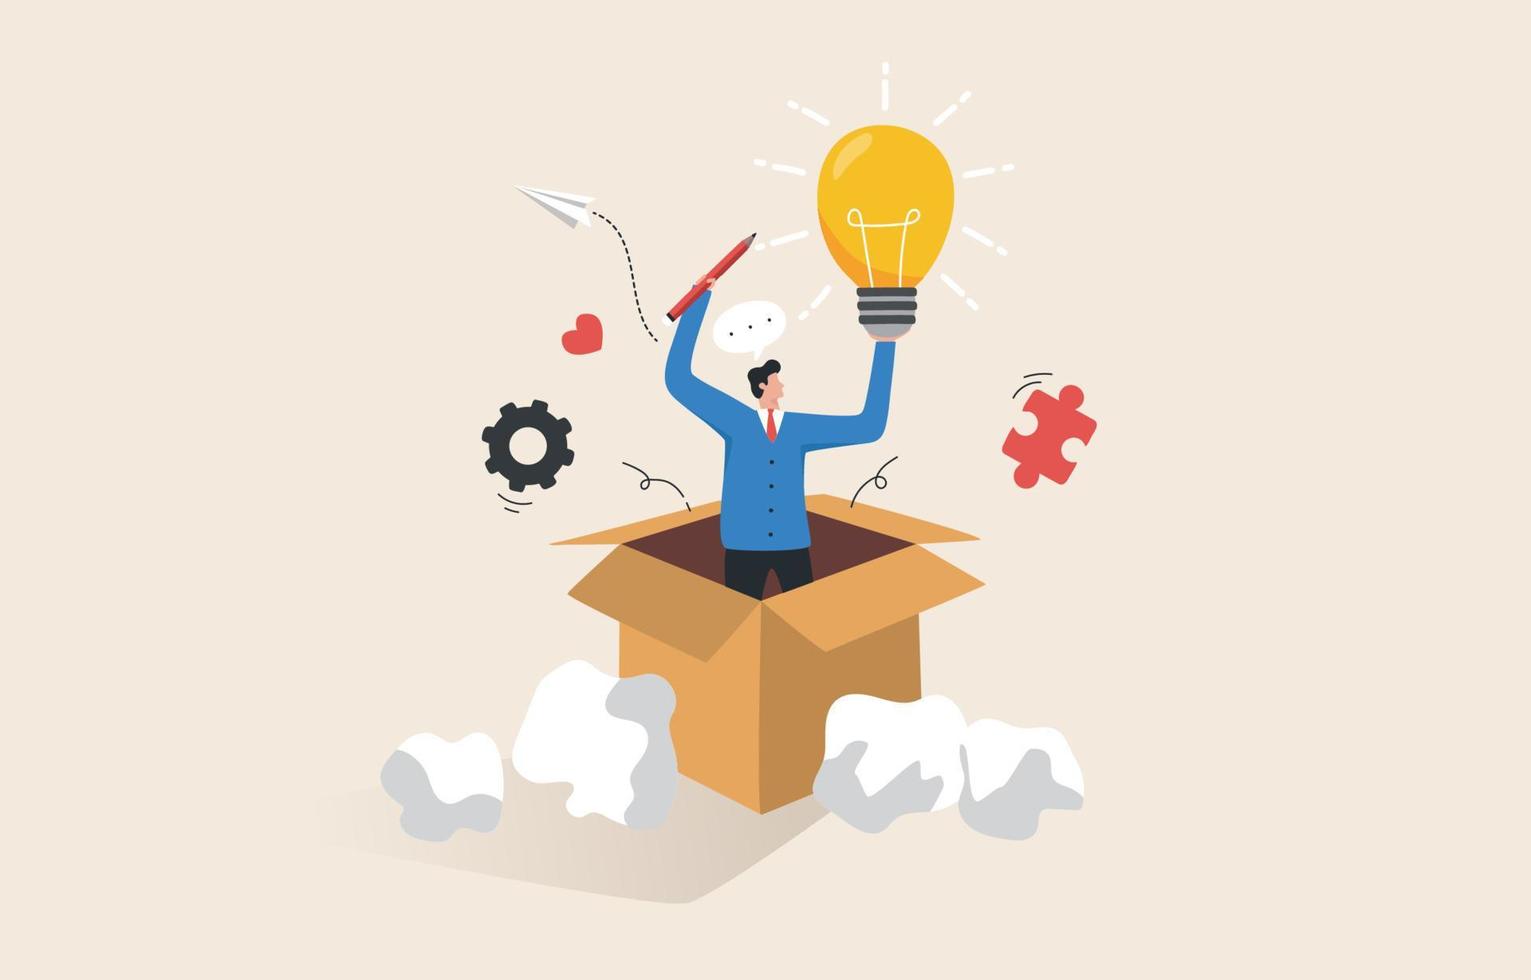 Discovering new creative ideas. Think outside the box. Solving work problems through innovation. Businessman holding a light bulb idea out of a box. vector